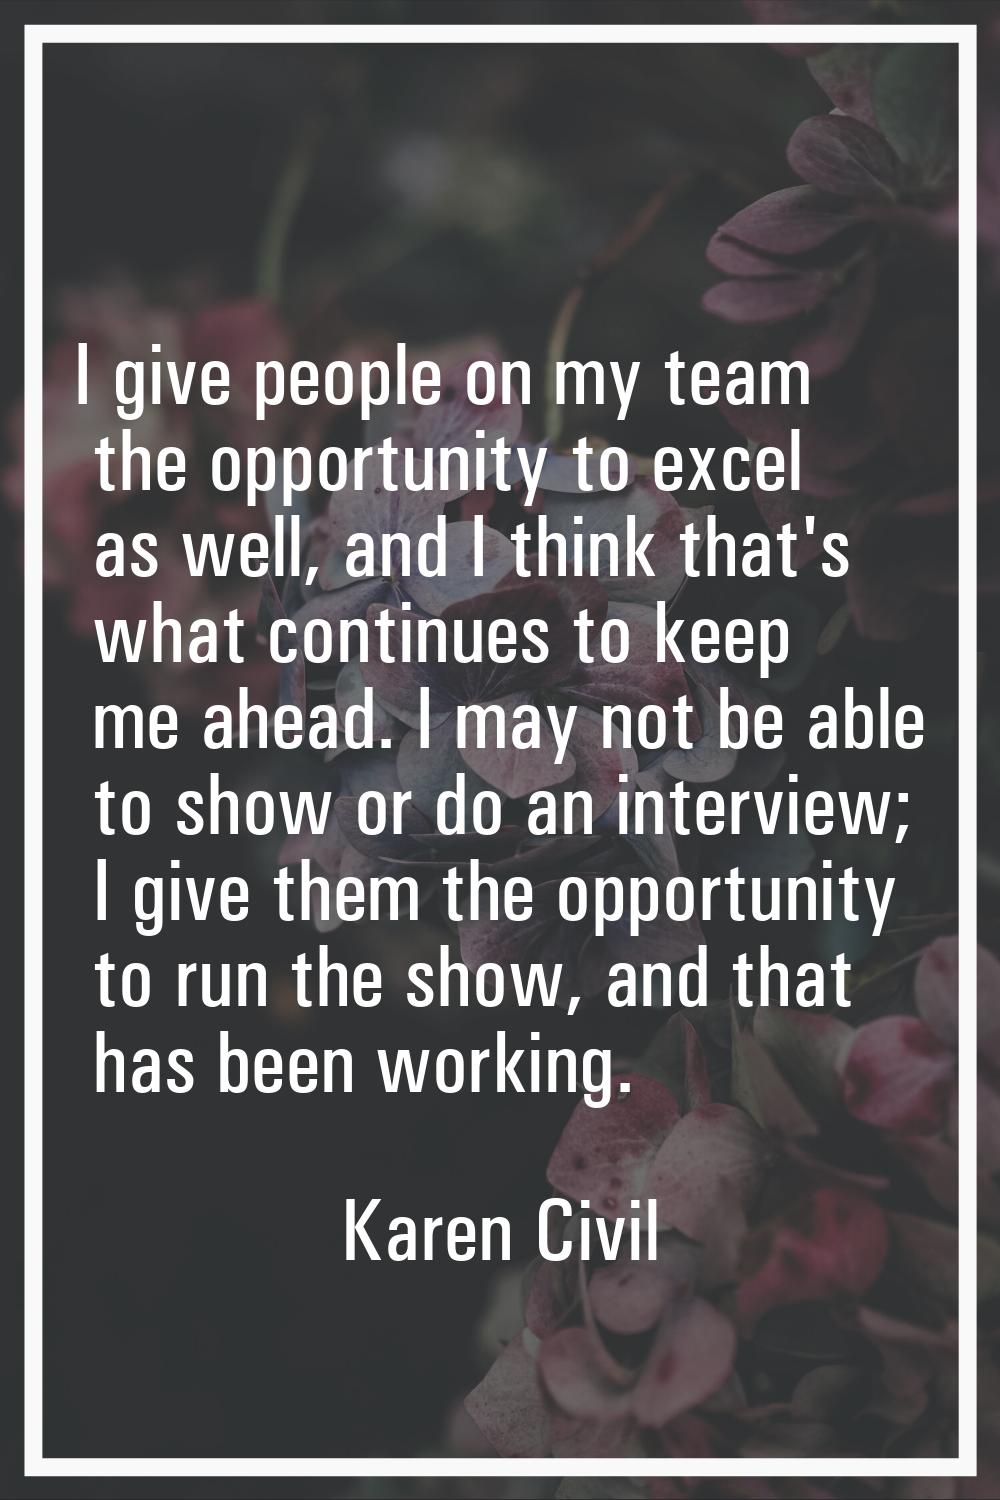 I give people on my team the opportunity to excel as well, and I think that's what continues to kee